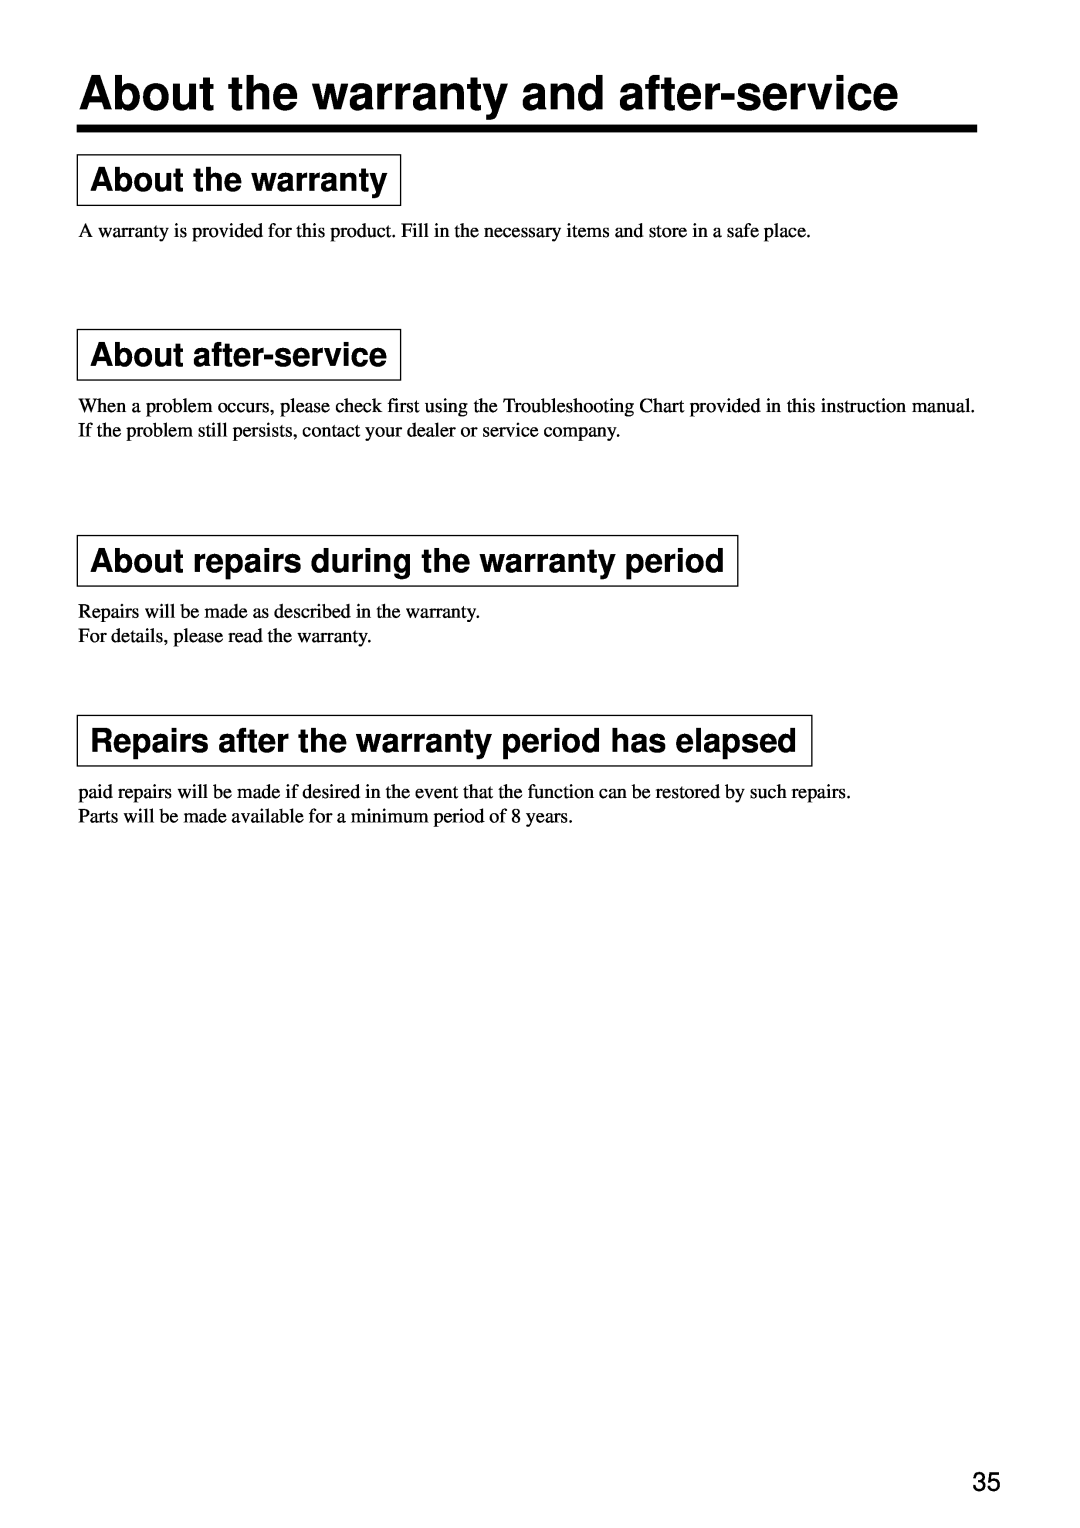 Hitachi CP-S860W About the warranty and after-service, About after-service, About repairs during the warranty period 